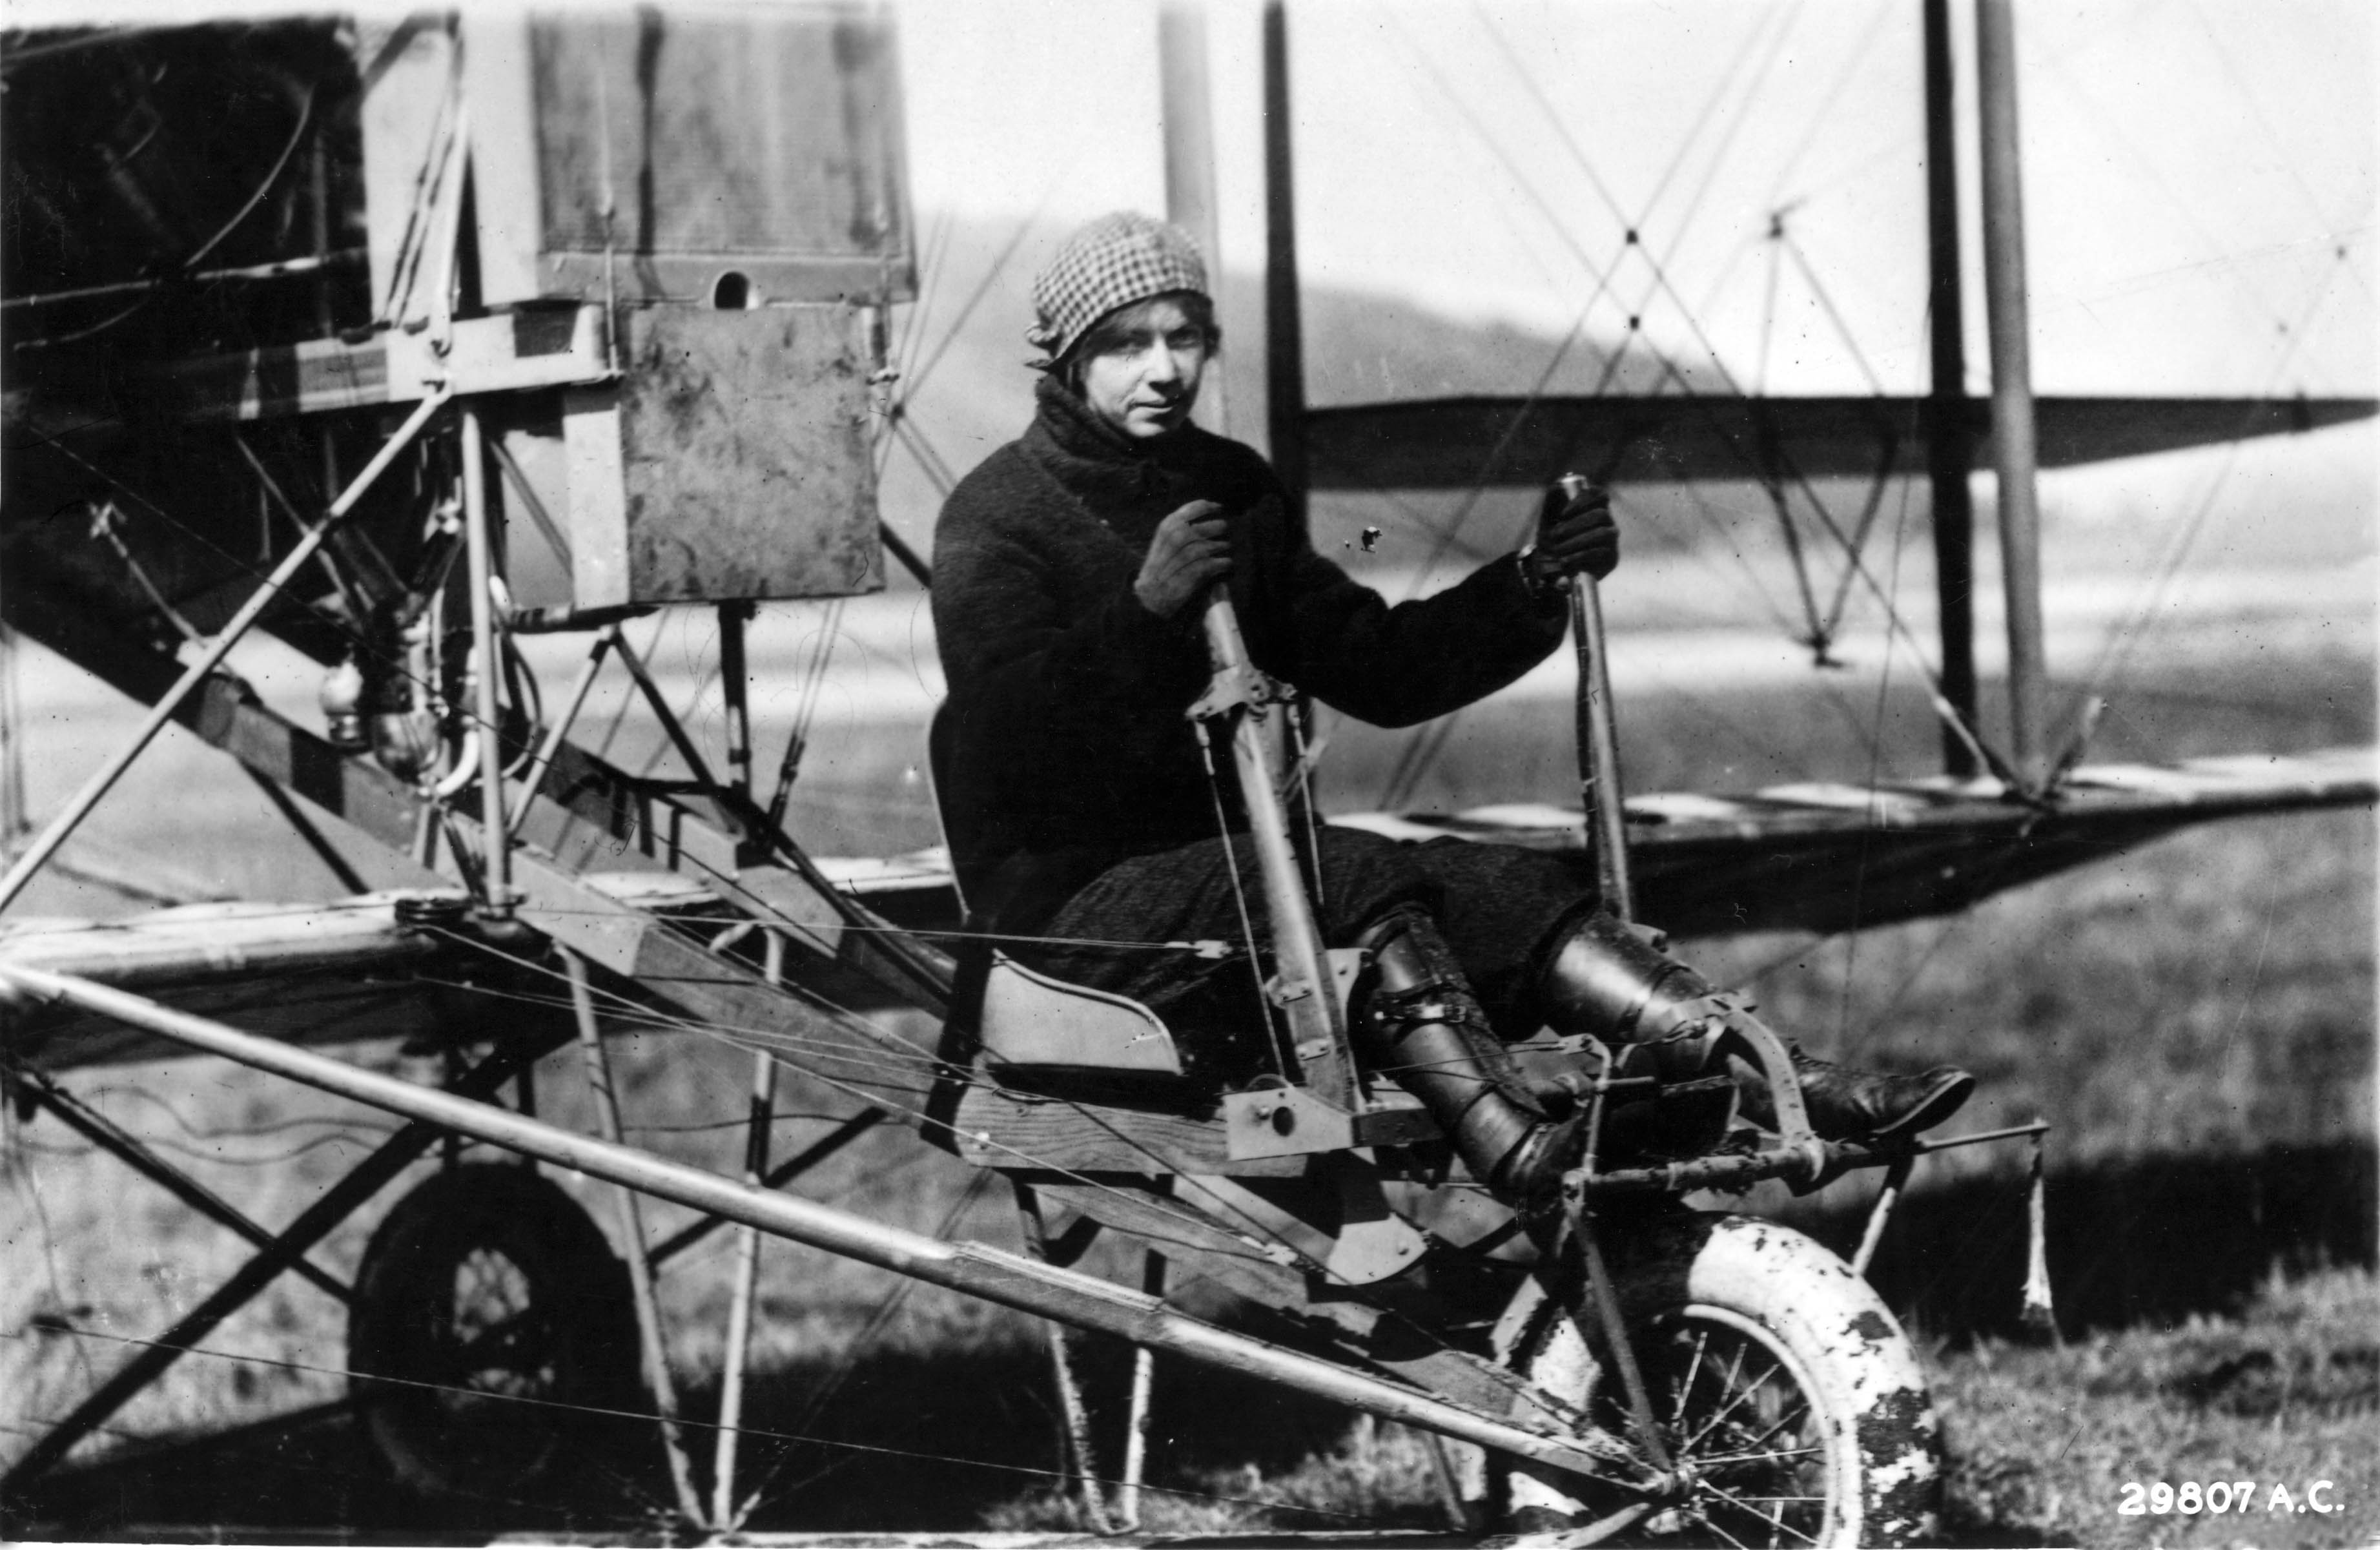 Ruth Bancroft Law at the controls of a Curtiss Pusher, ca. 1915. (U.S. Air Force)